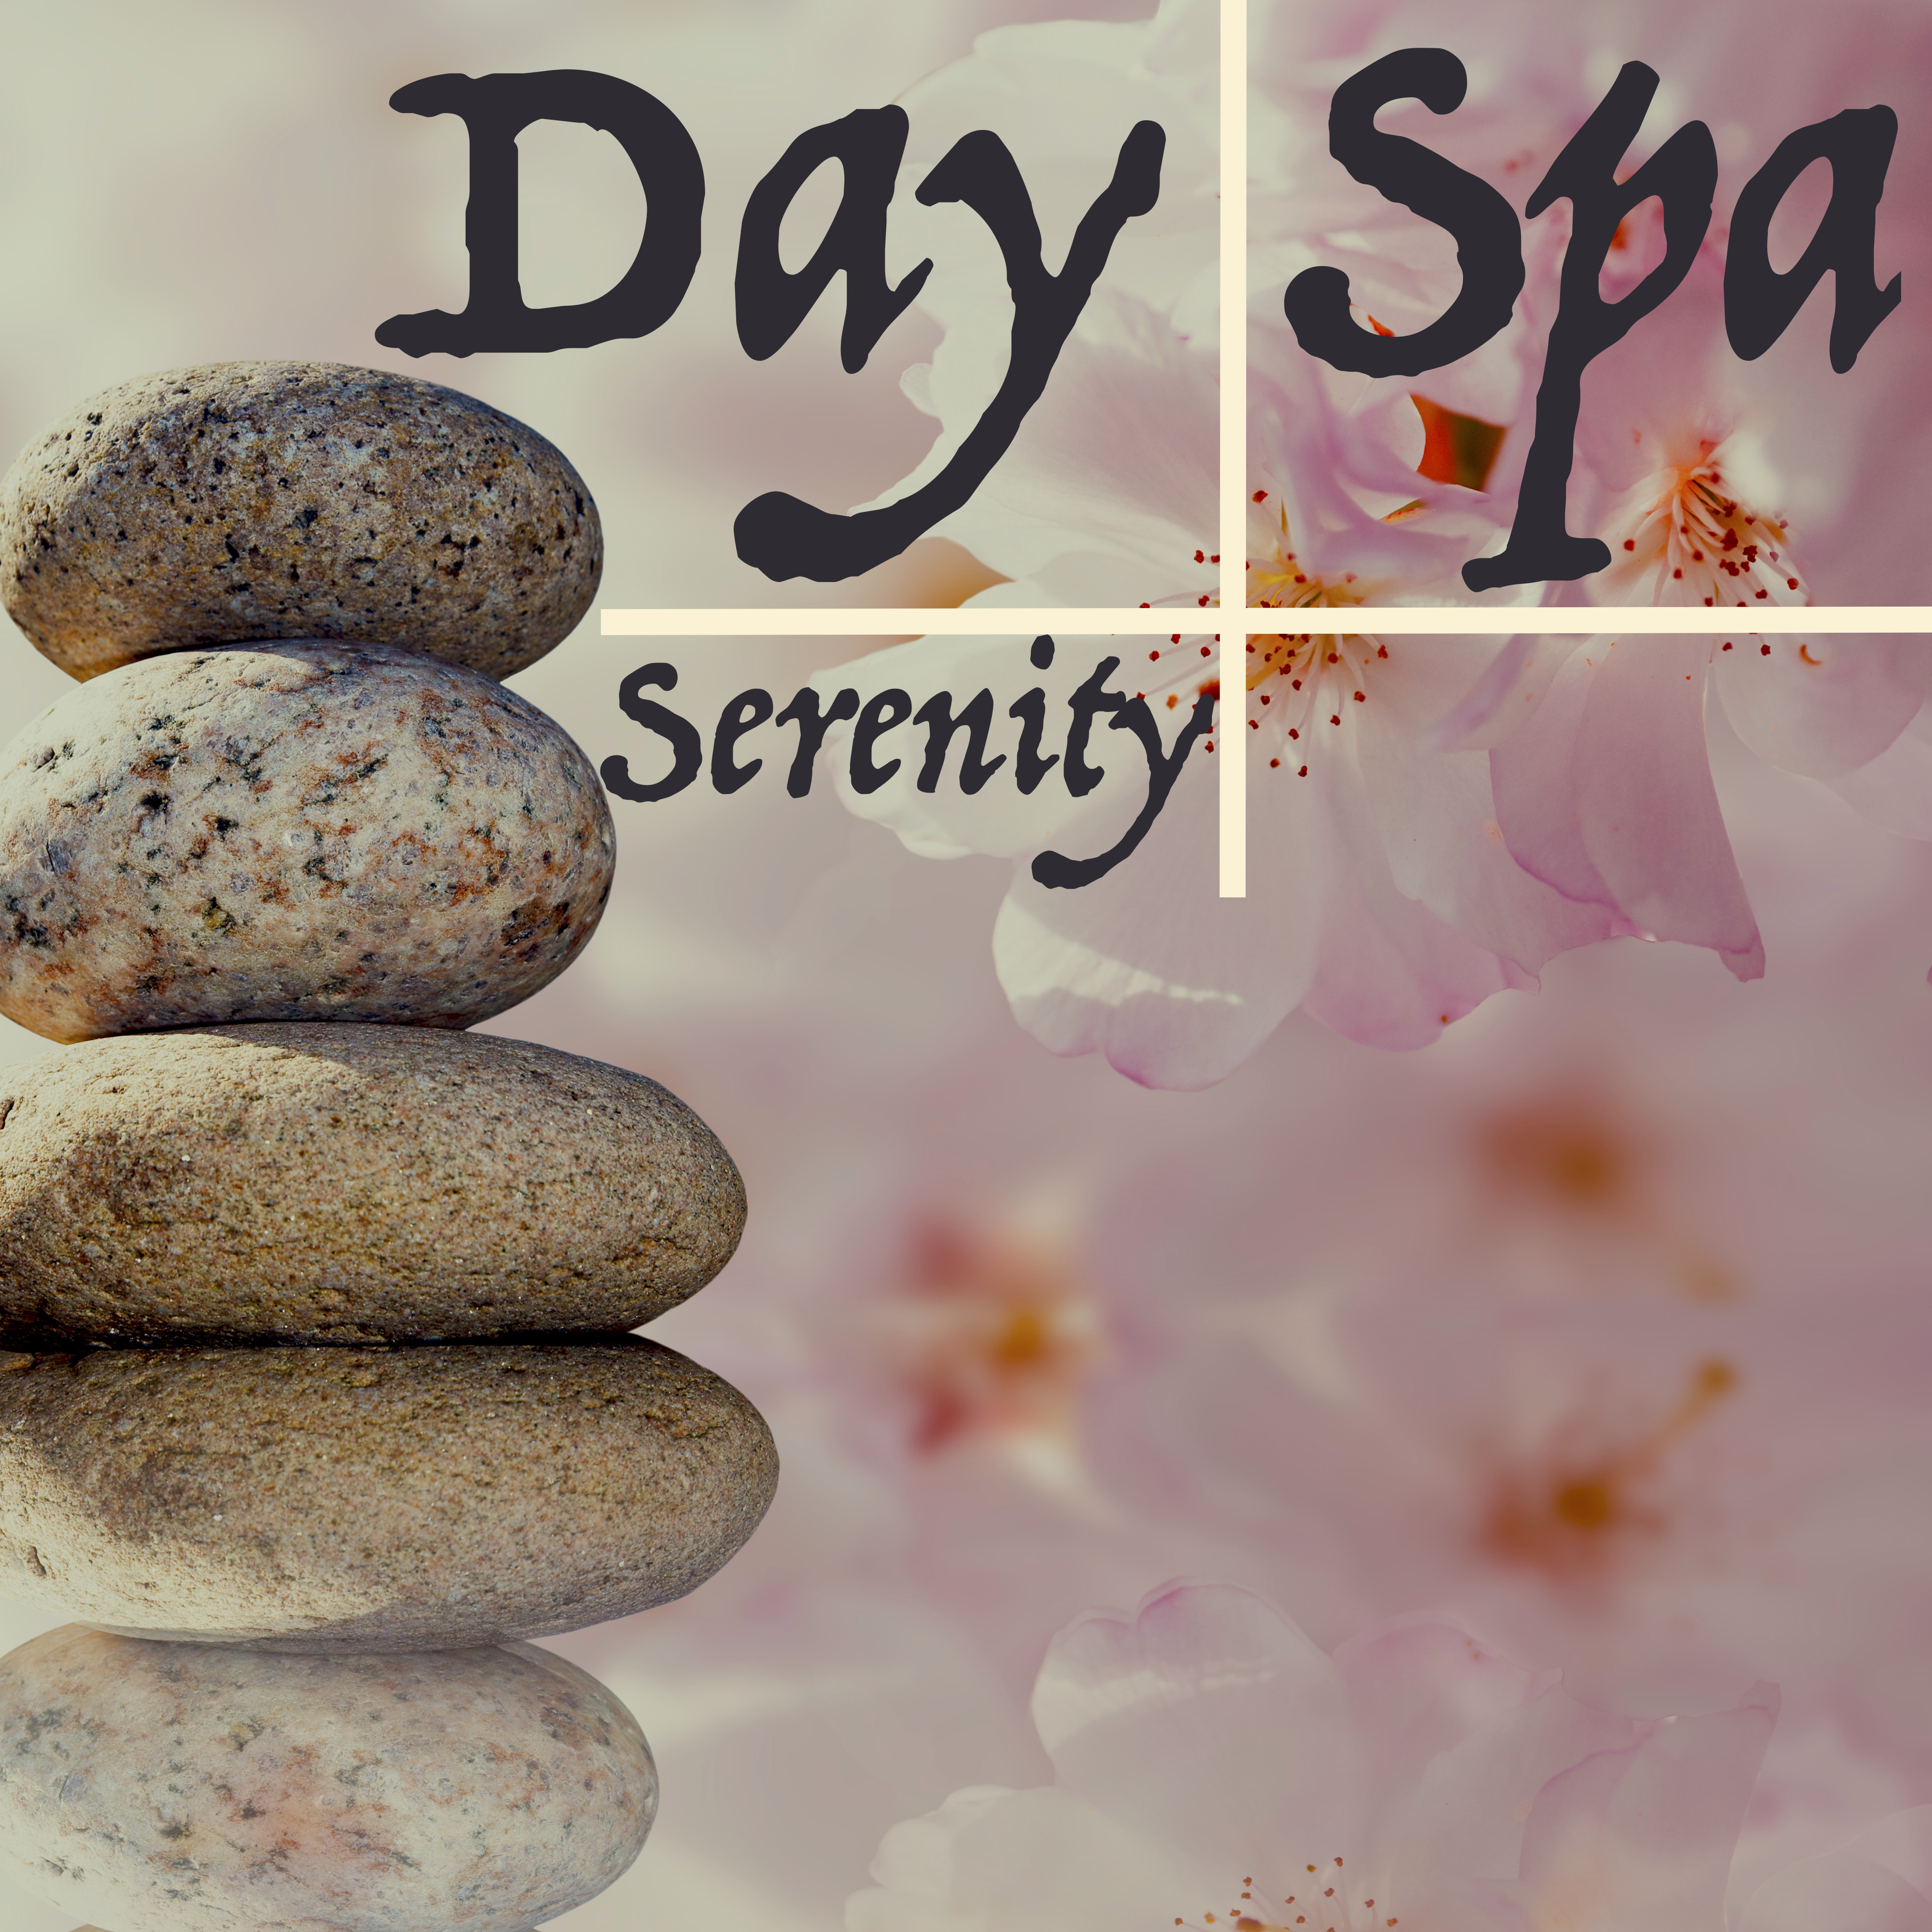 Day Spa: Serenity Vital Energy Soothing Music, Healing Sounds, Luxury Spa Songs, Relaxing Meditation, Deep Sleep Inducing & Well Being Relaxation